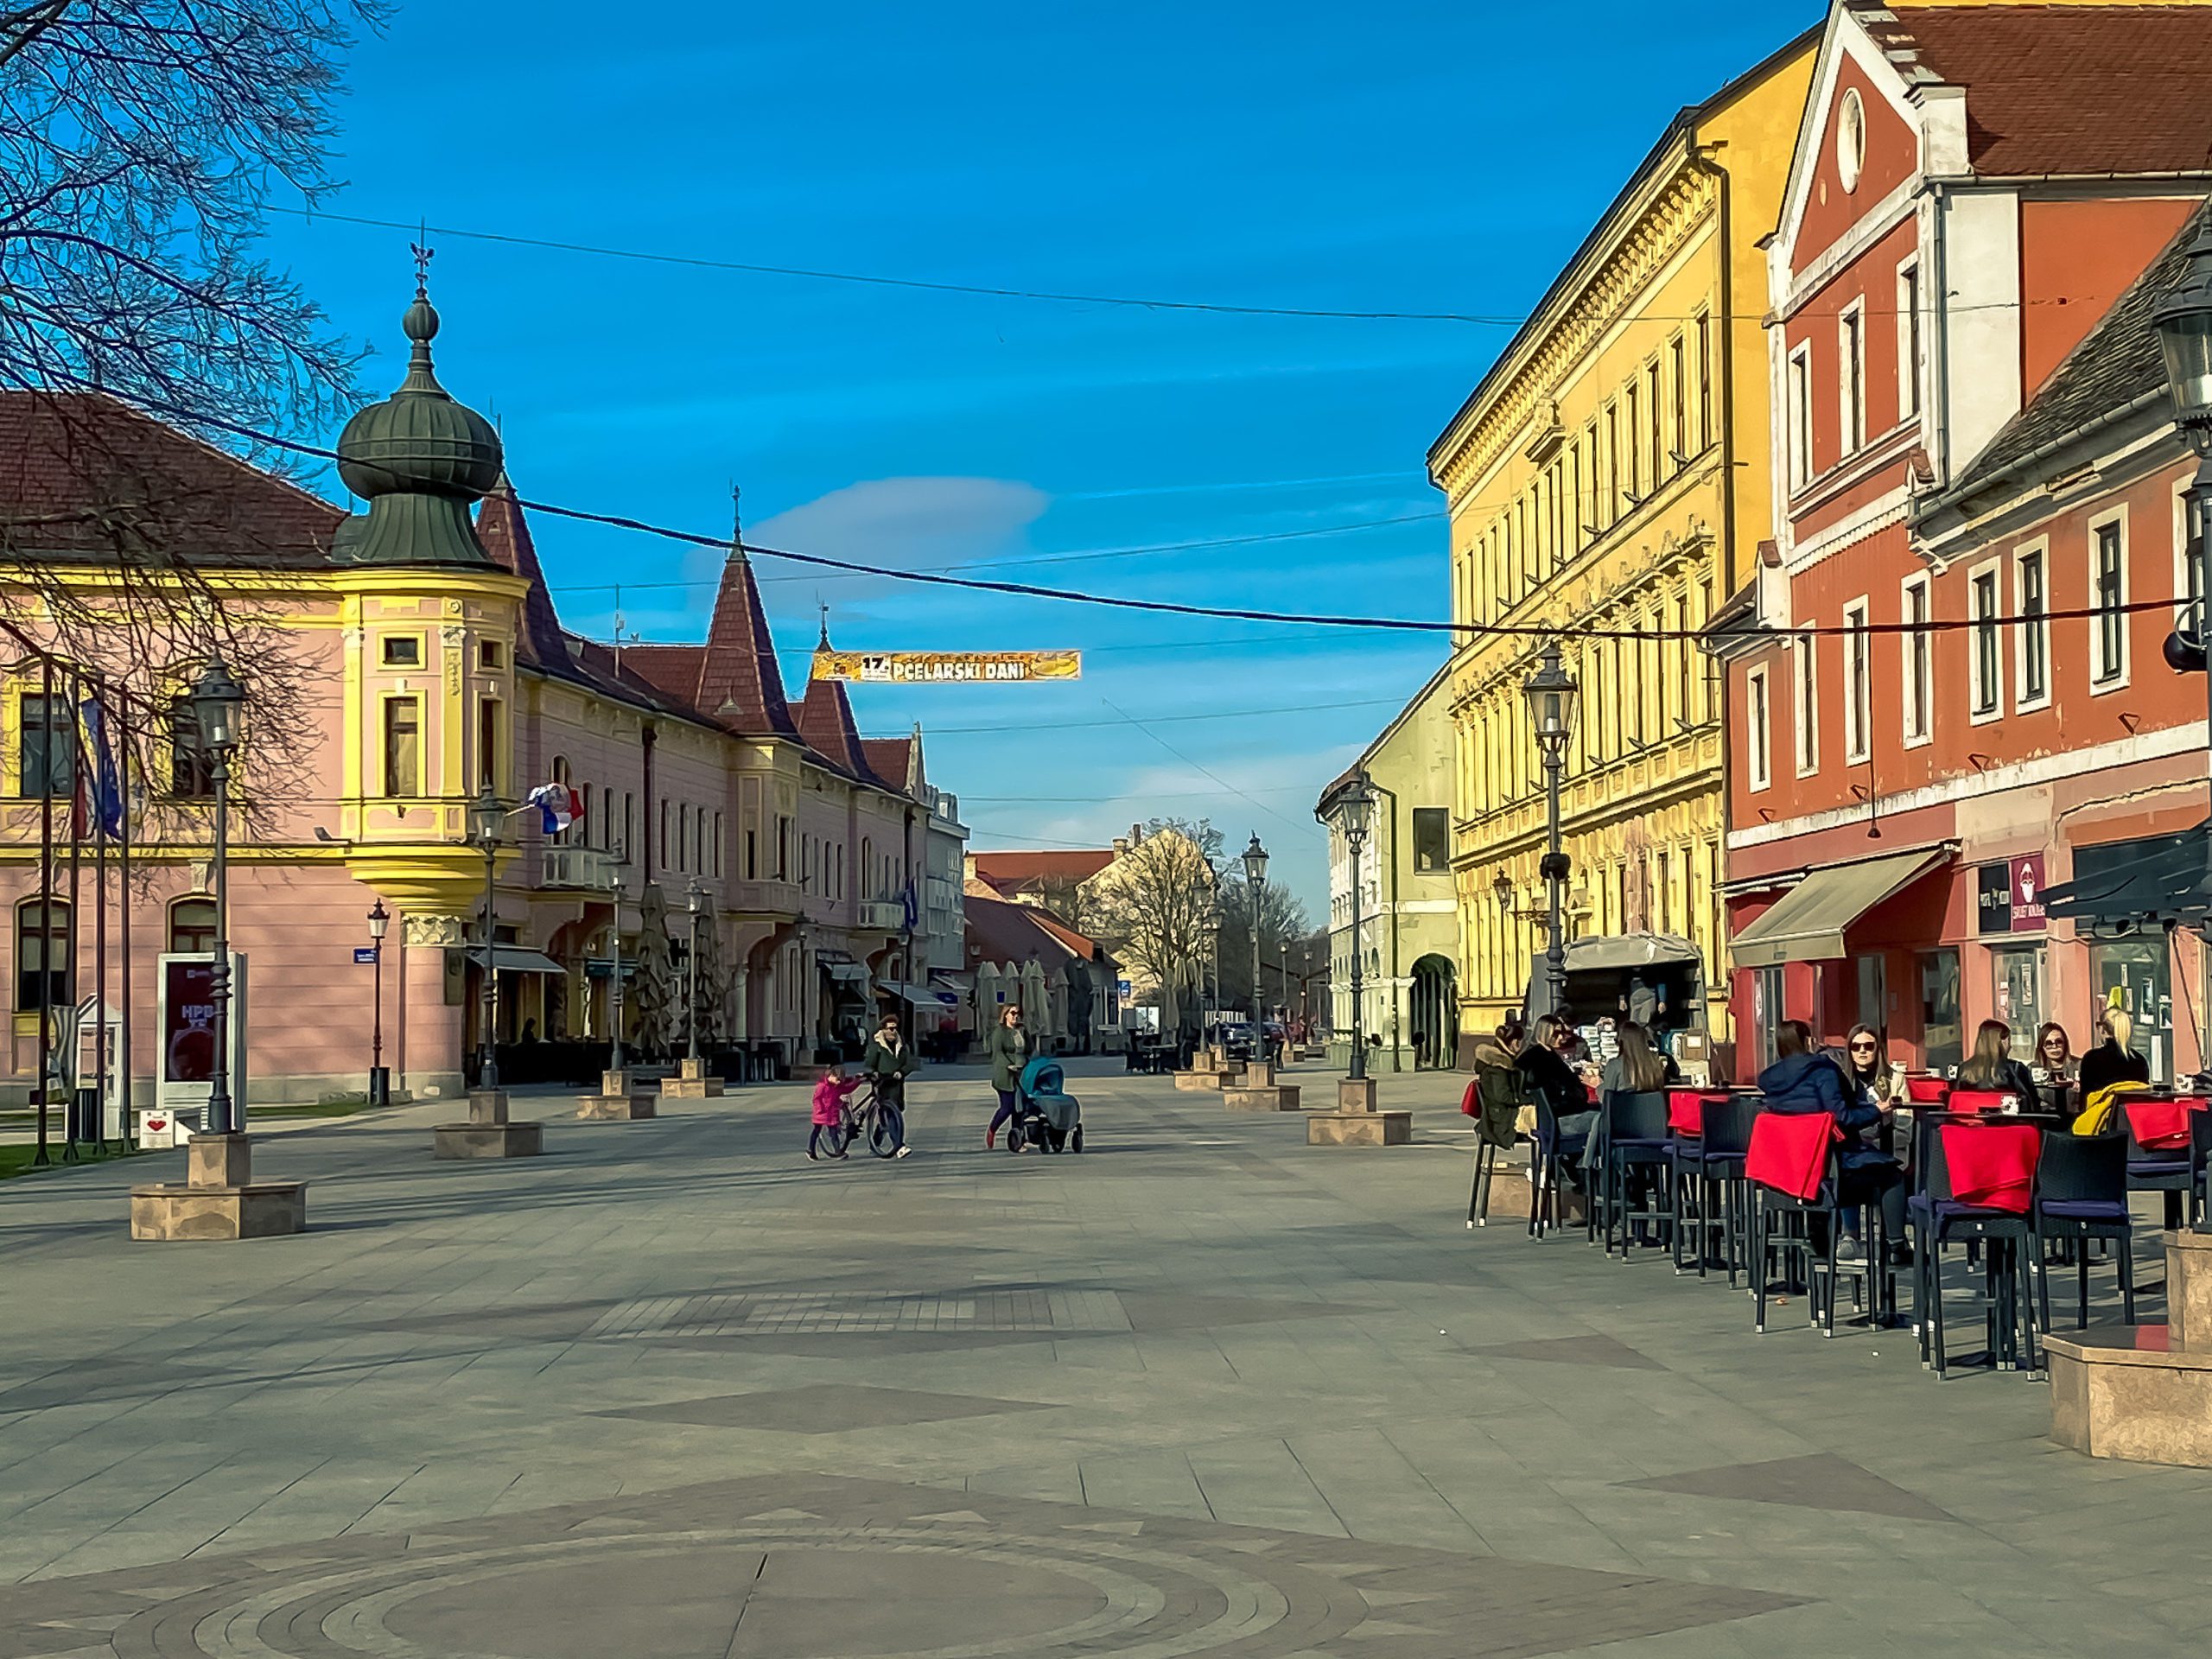 Vinkovci is the oldest town in Europe and birthplace of Roman emperors